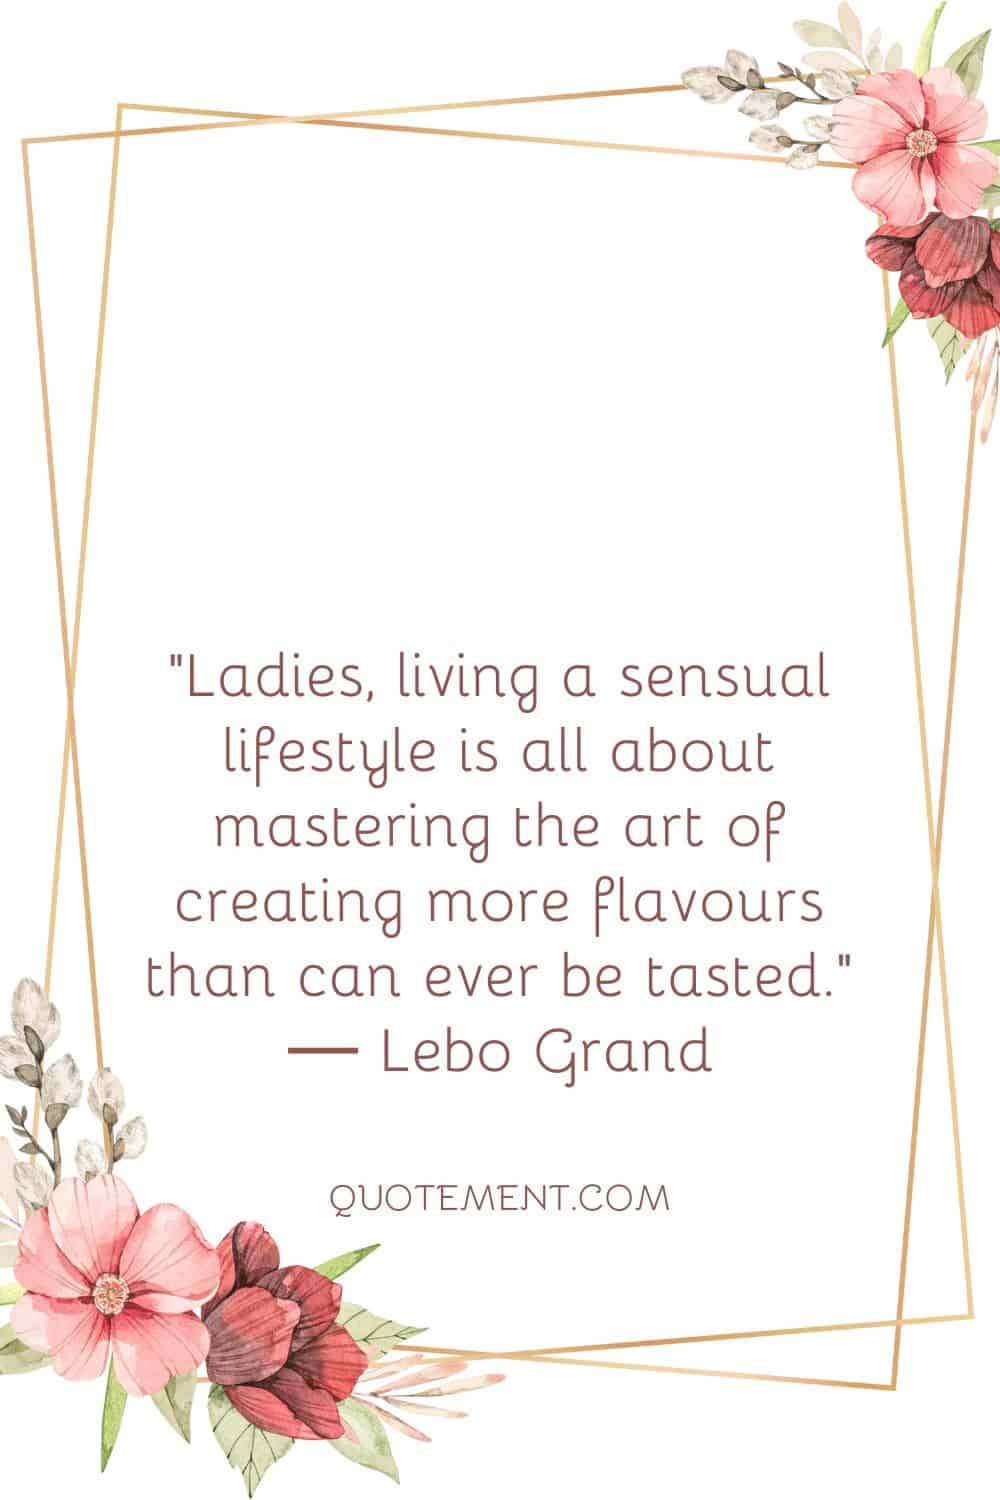 Ladies, living a sensual lifestyle is all about mastering the art of creating more flavours than can ever be tasted